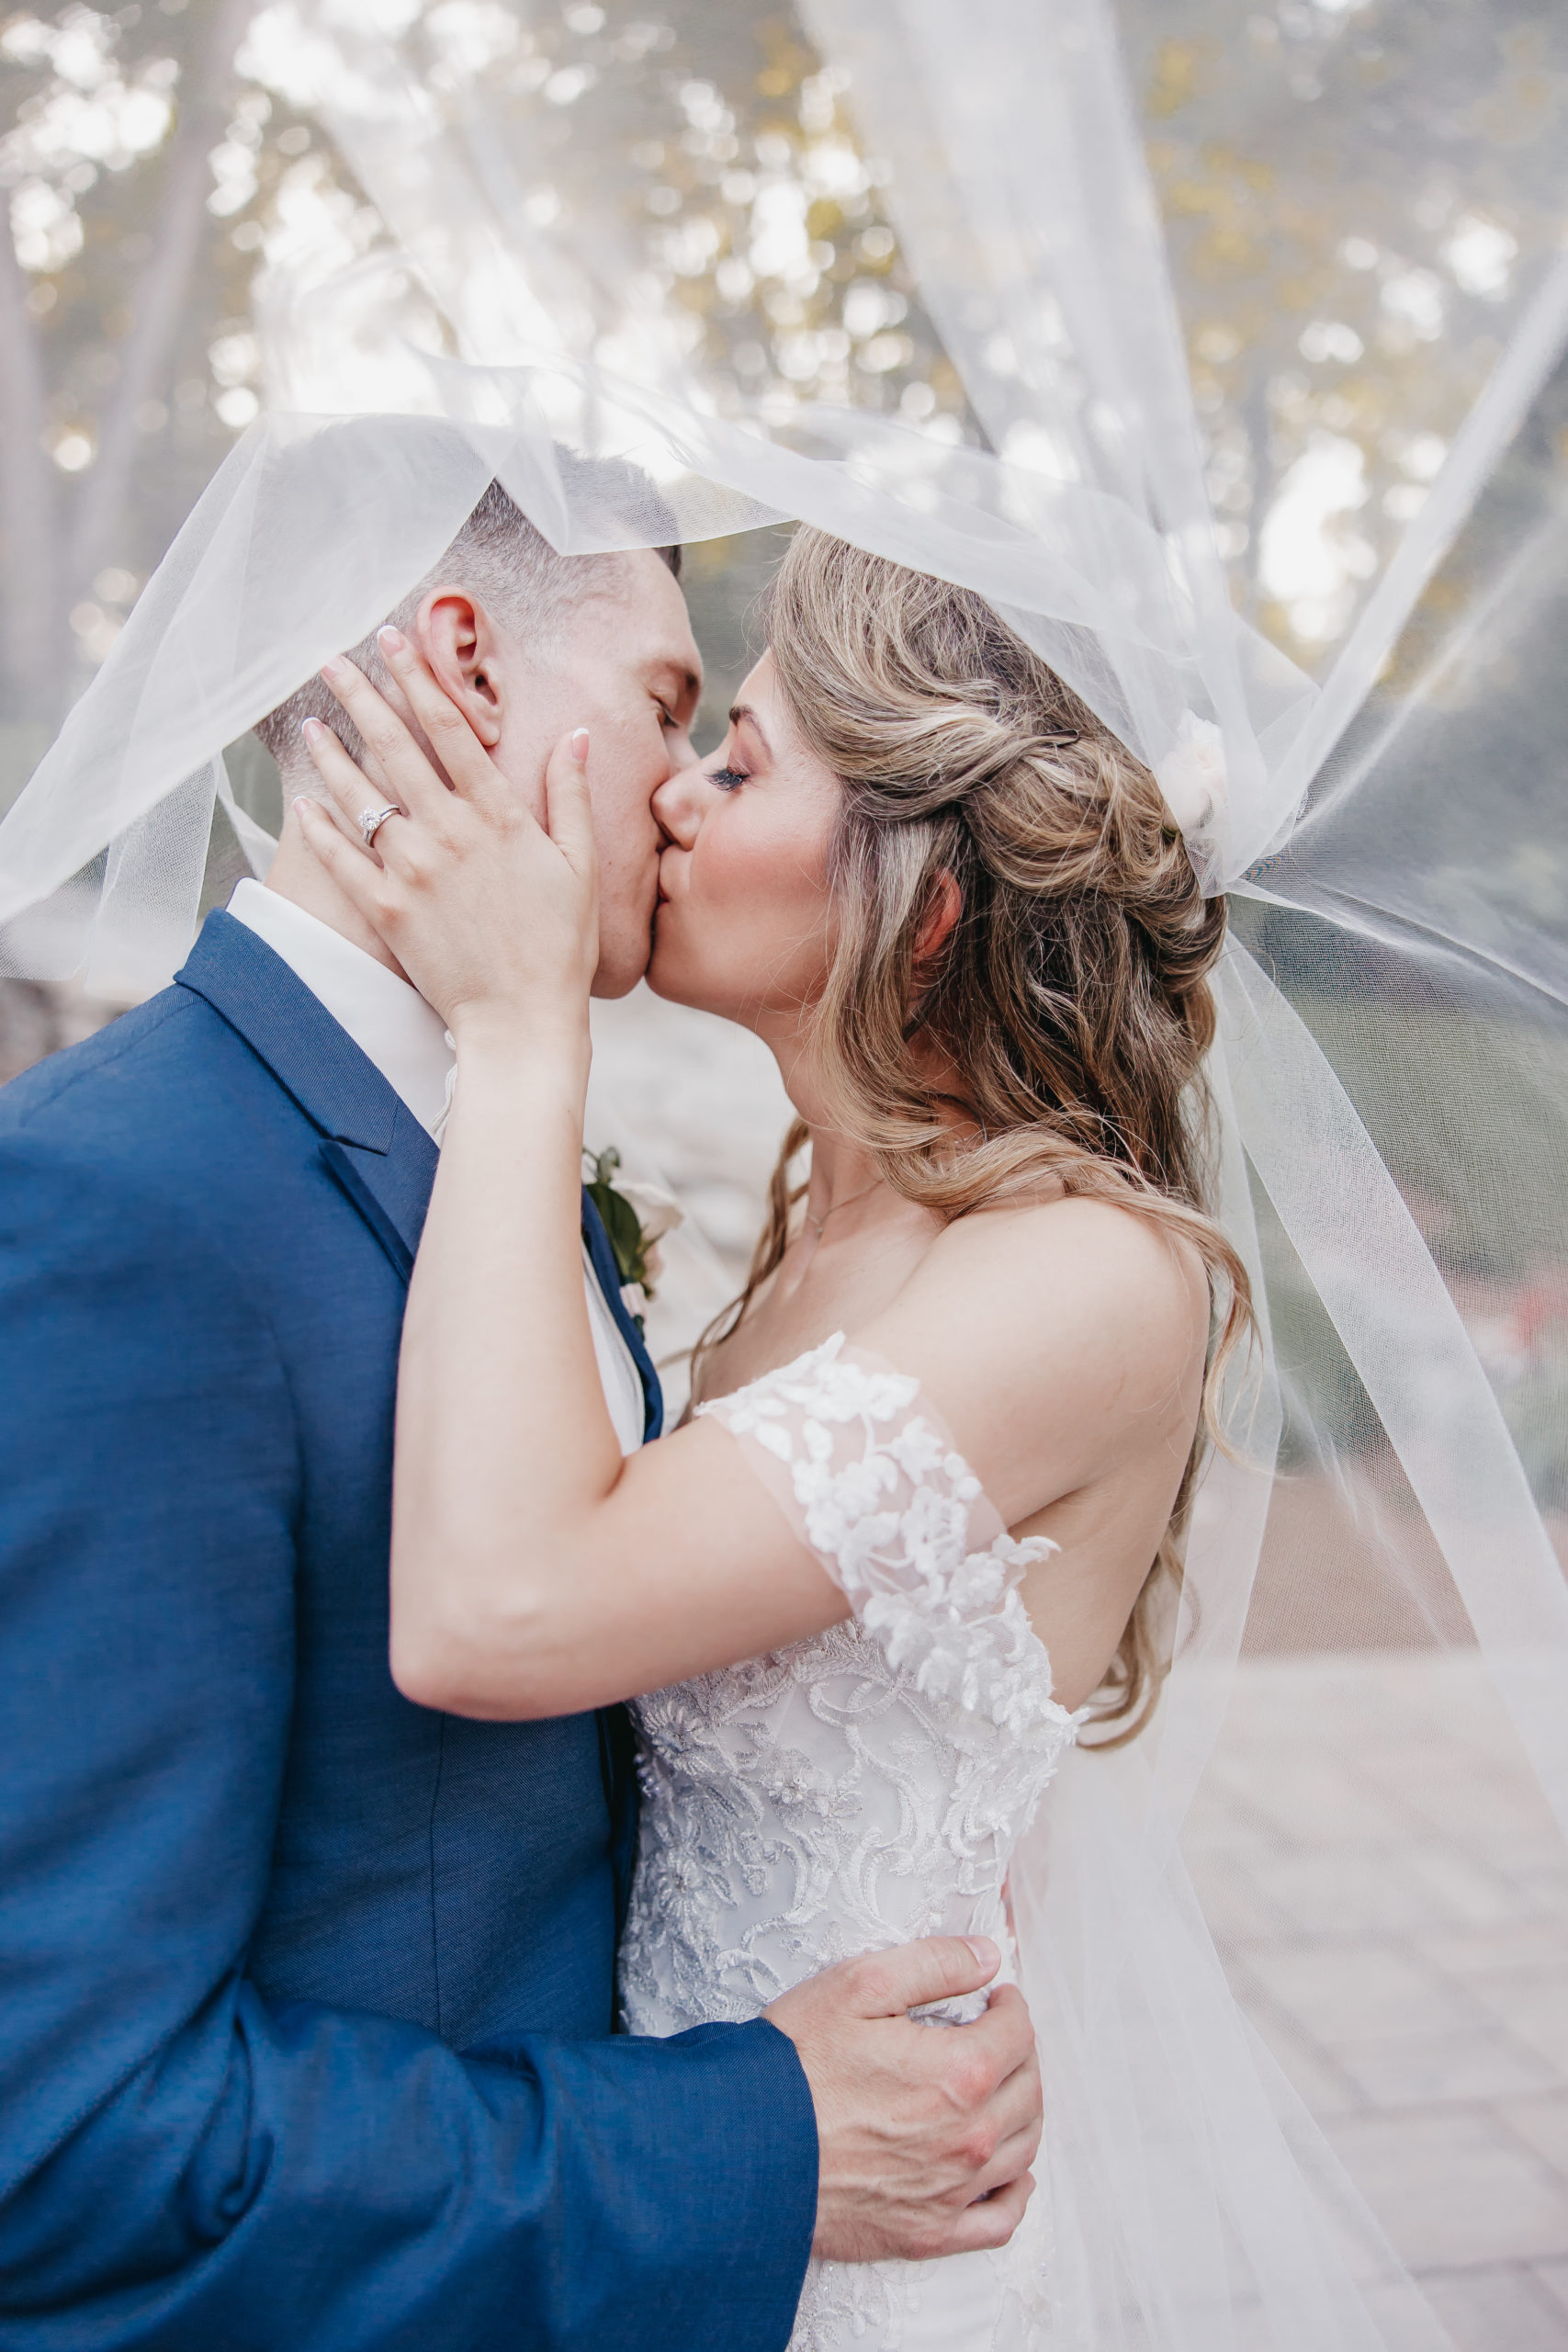 What to Look For When Choosing Between Christian Wedding Photographers. Couple sharing a kiss underneath bride's sheer veil.